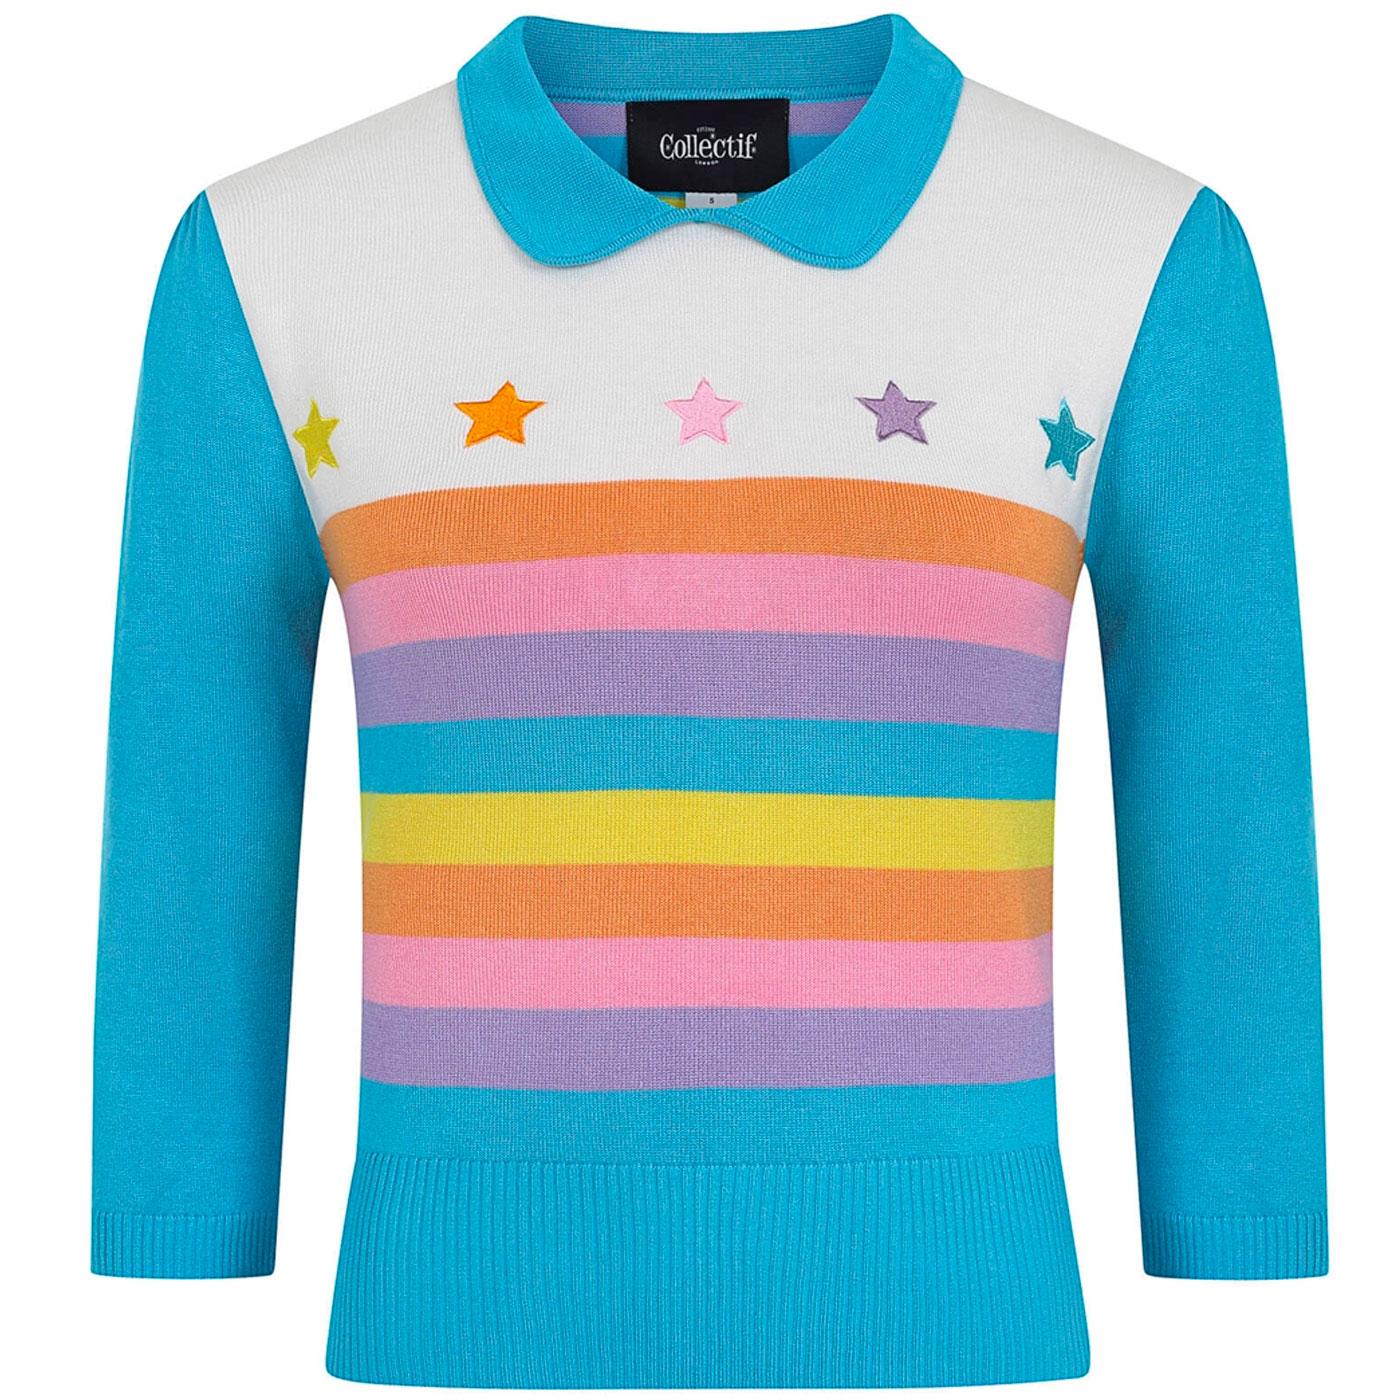 Collectif Rigel Star Knitted Rainbow Striped Top 